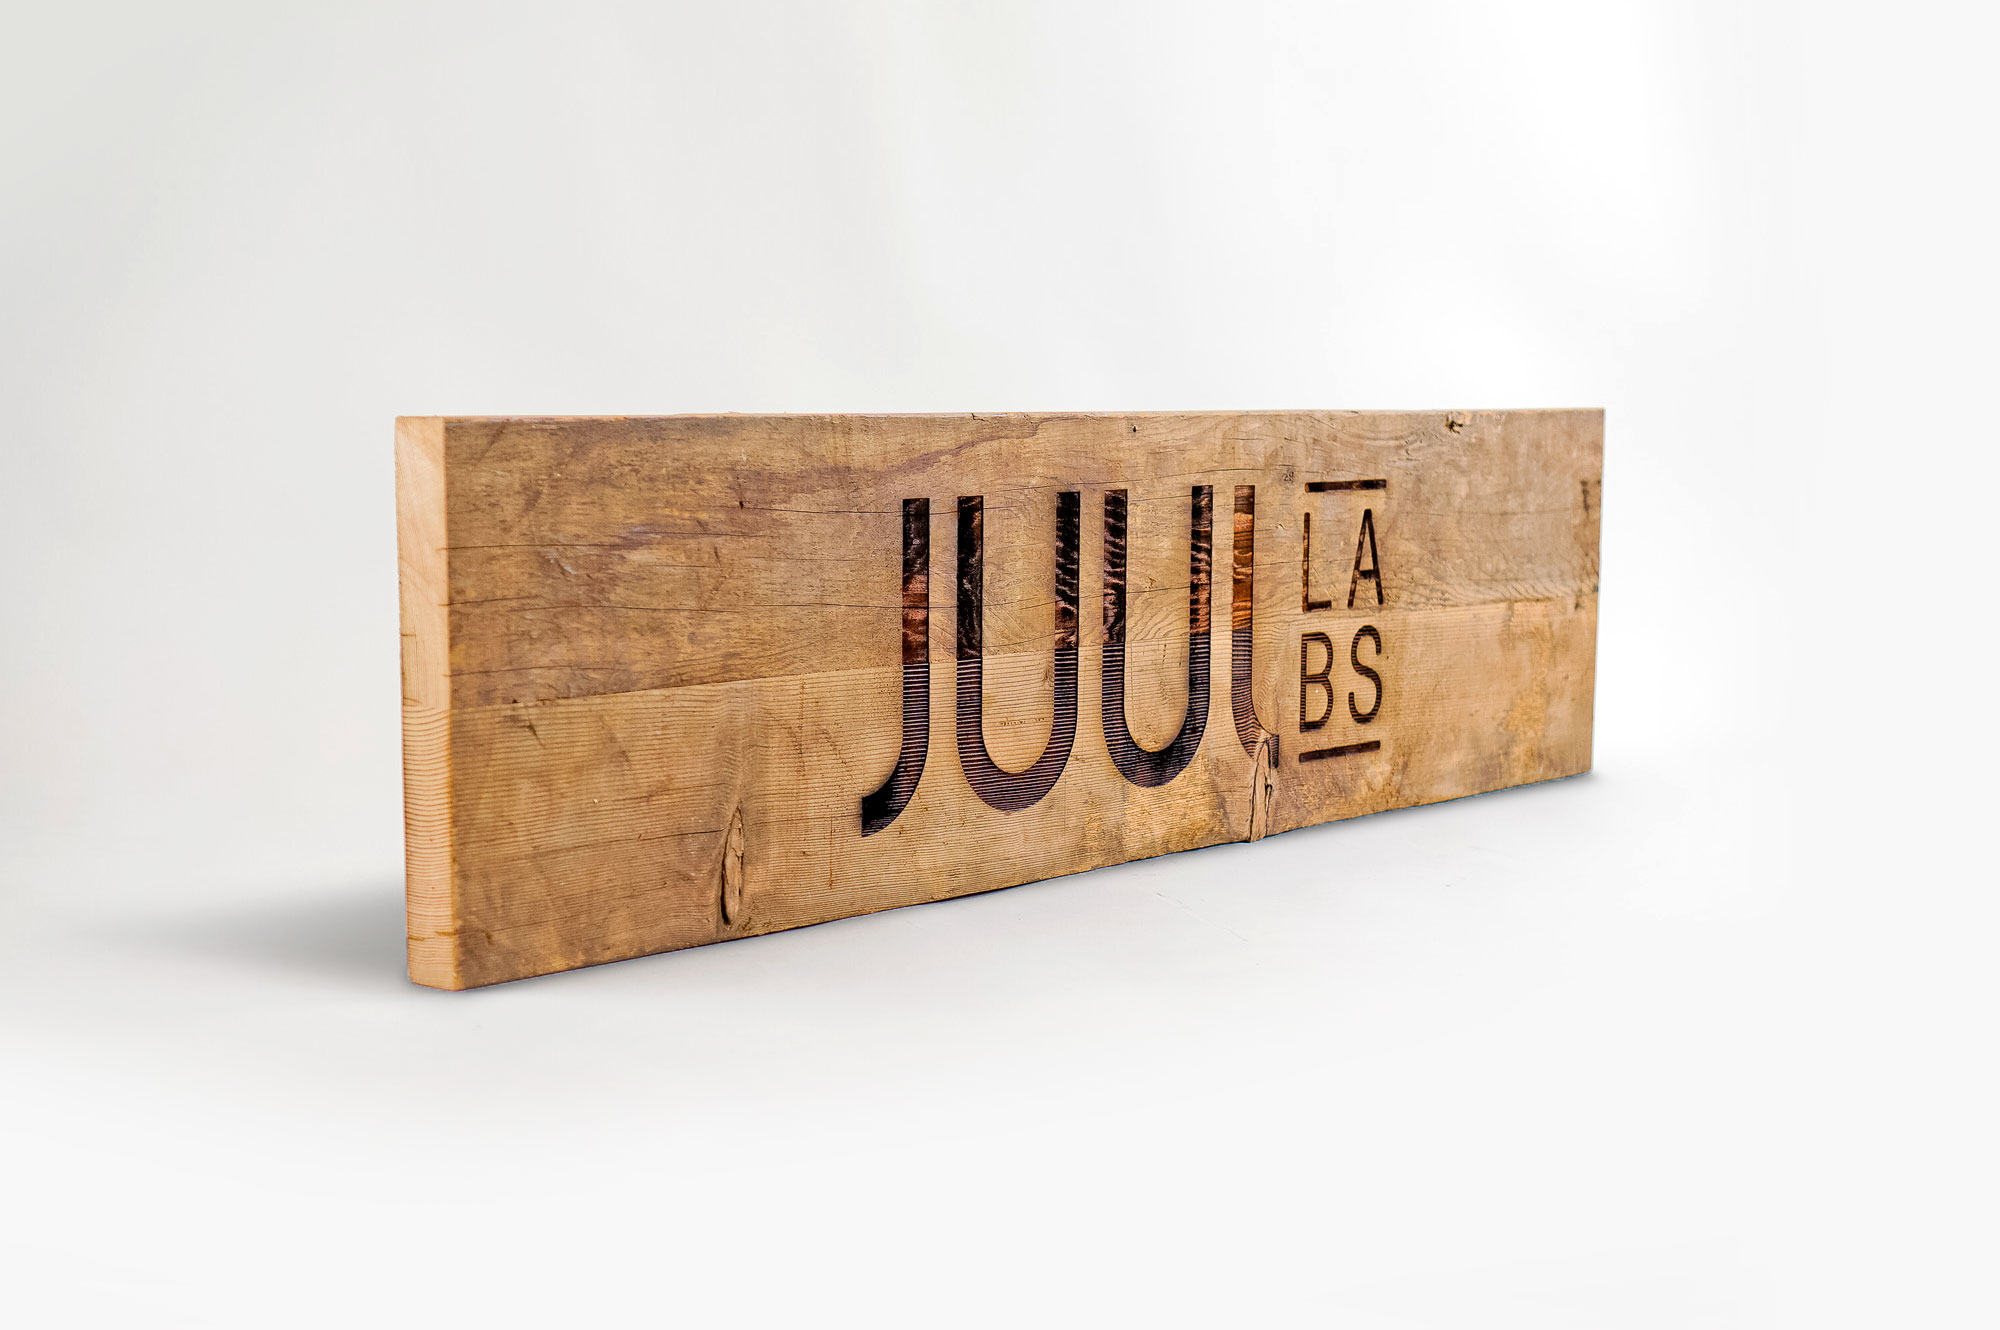 Reclaimed wood sign with etched logo for the San Francisco office of Juul, an electronic cigarette company.